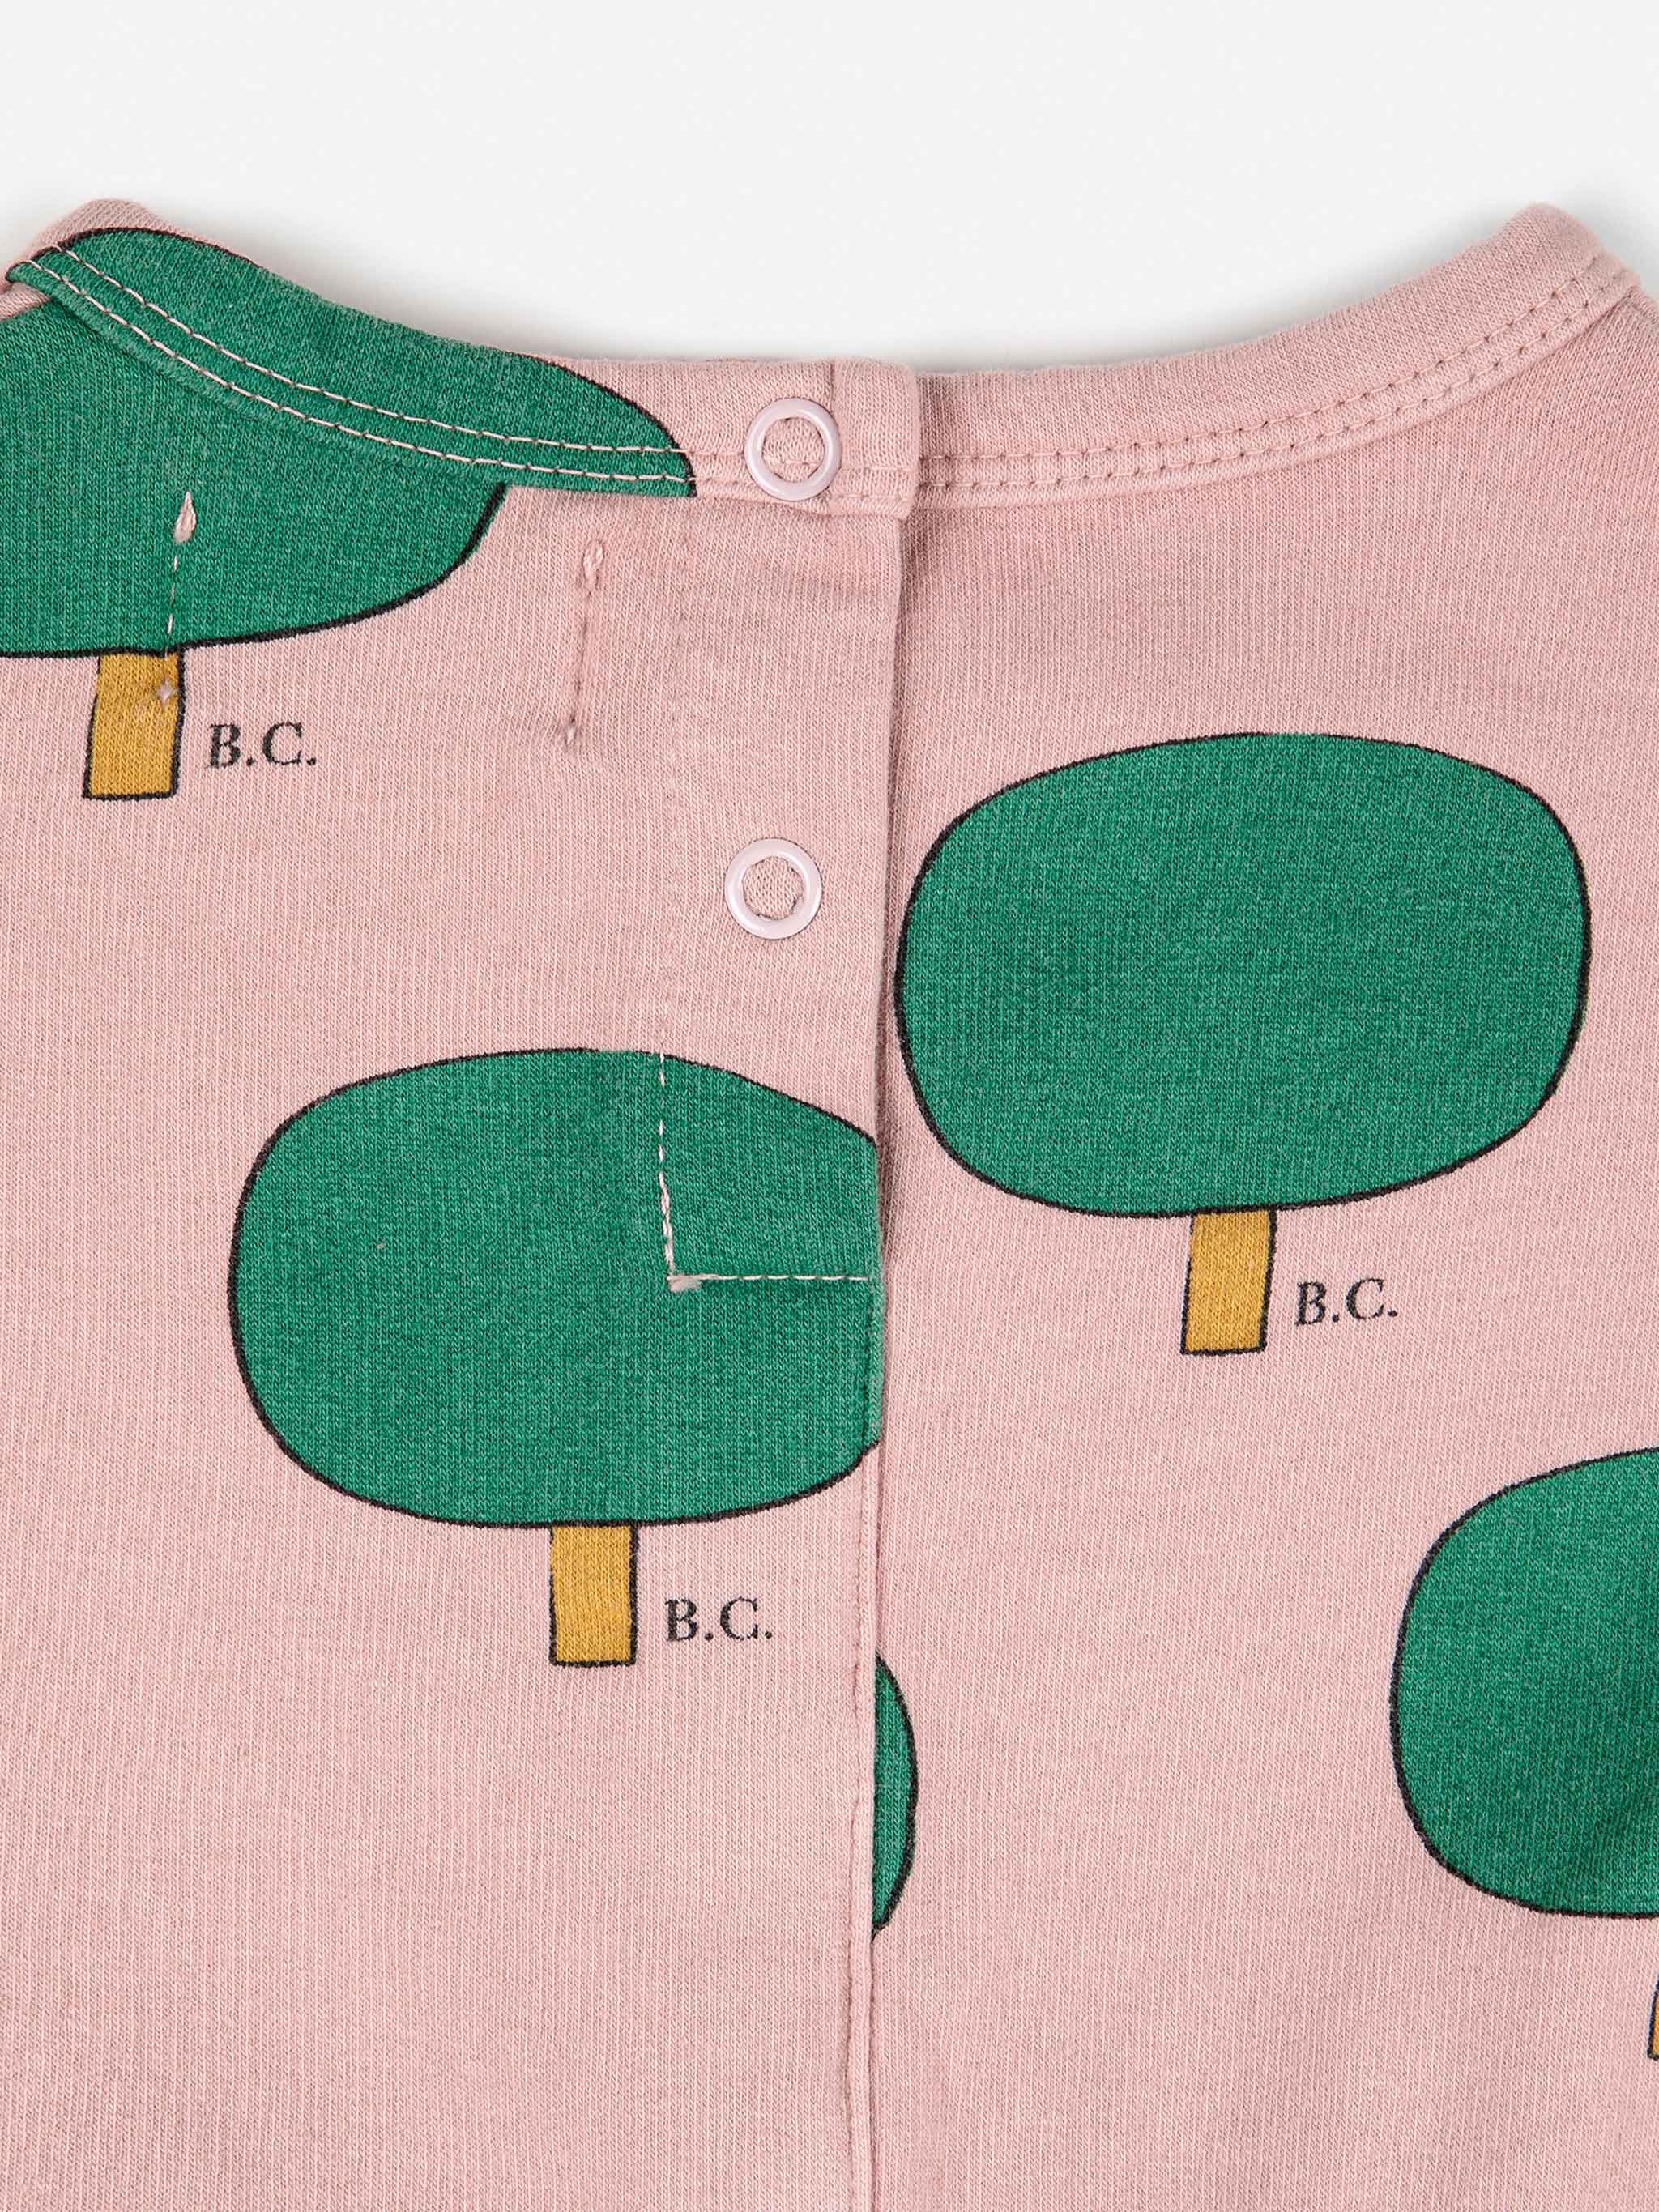 Baby Green Tree all over dress - 6M